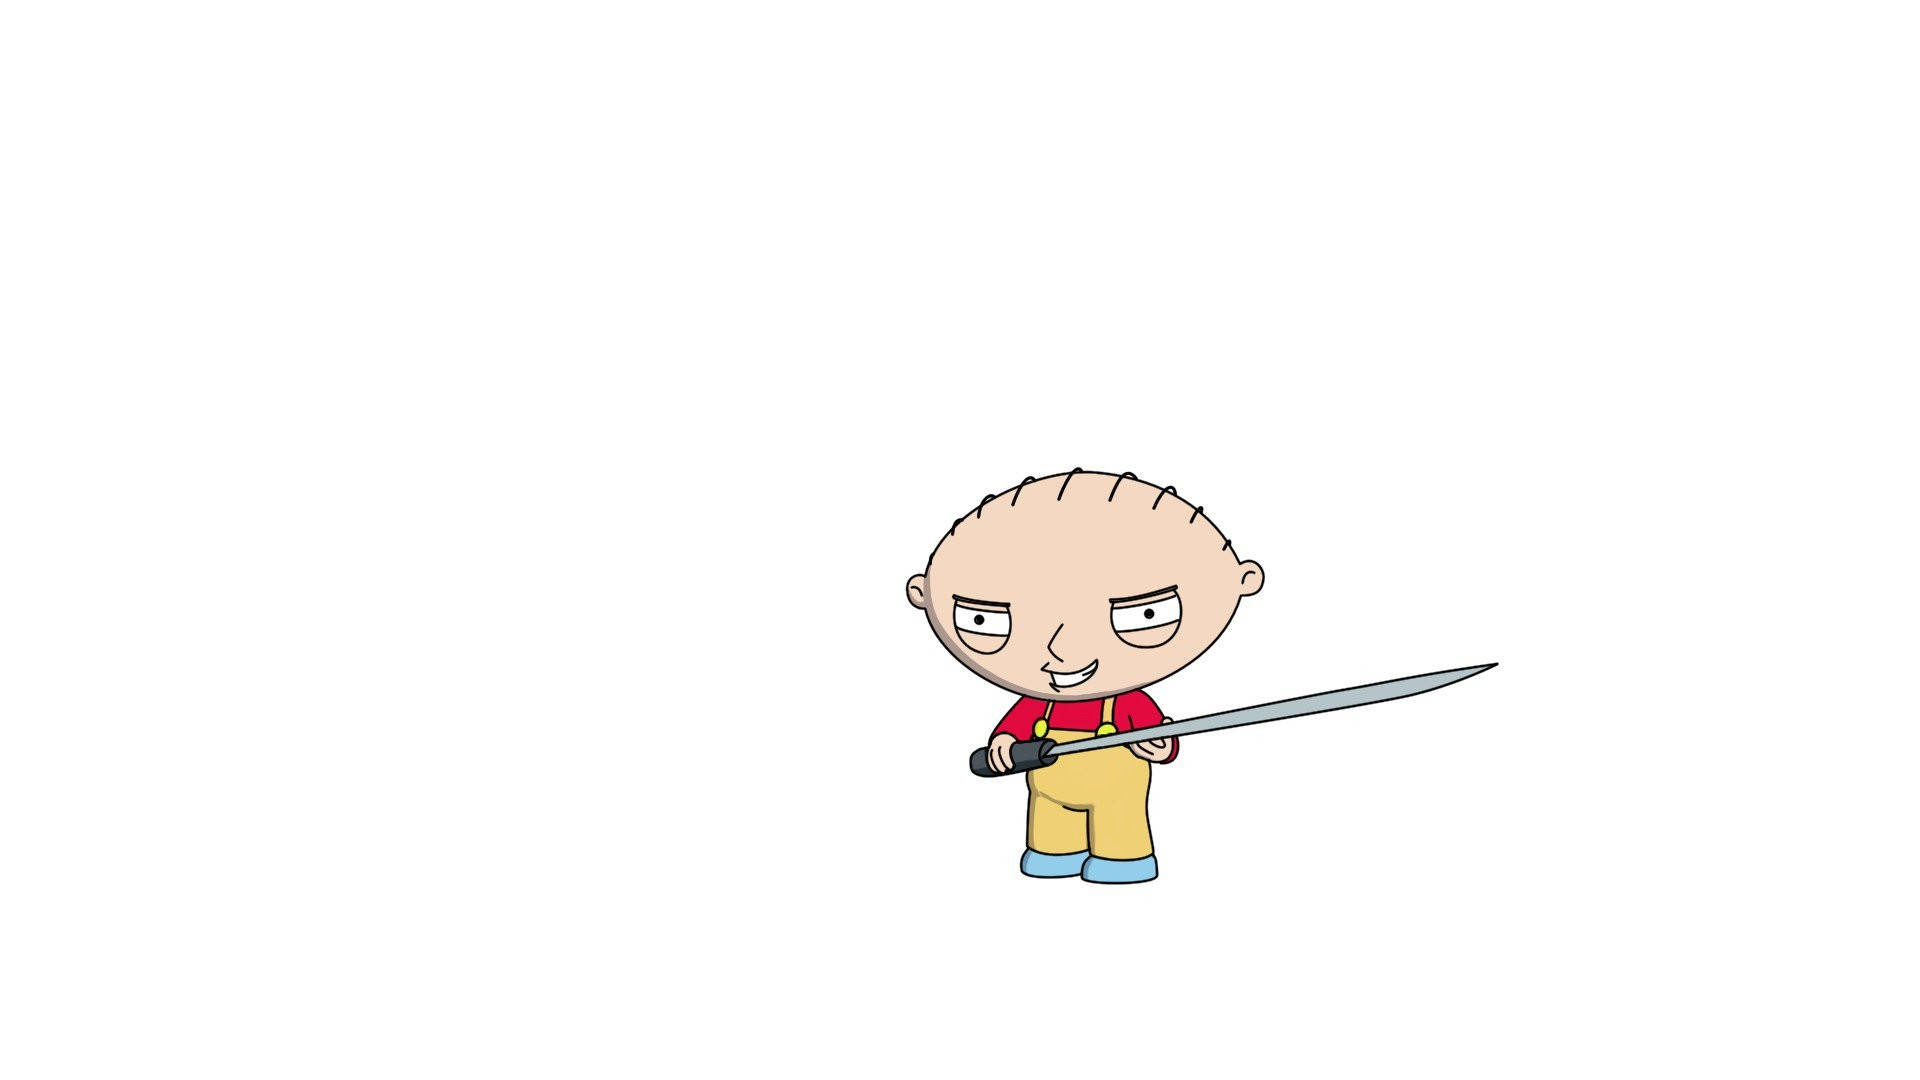 Caption: Adventurous Stewie Griffin With A Sword In Action